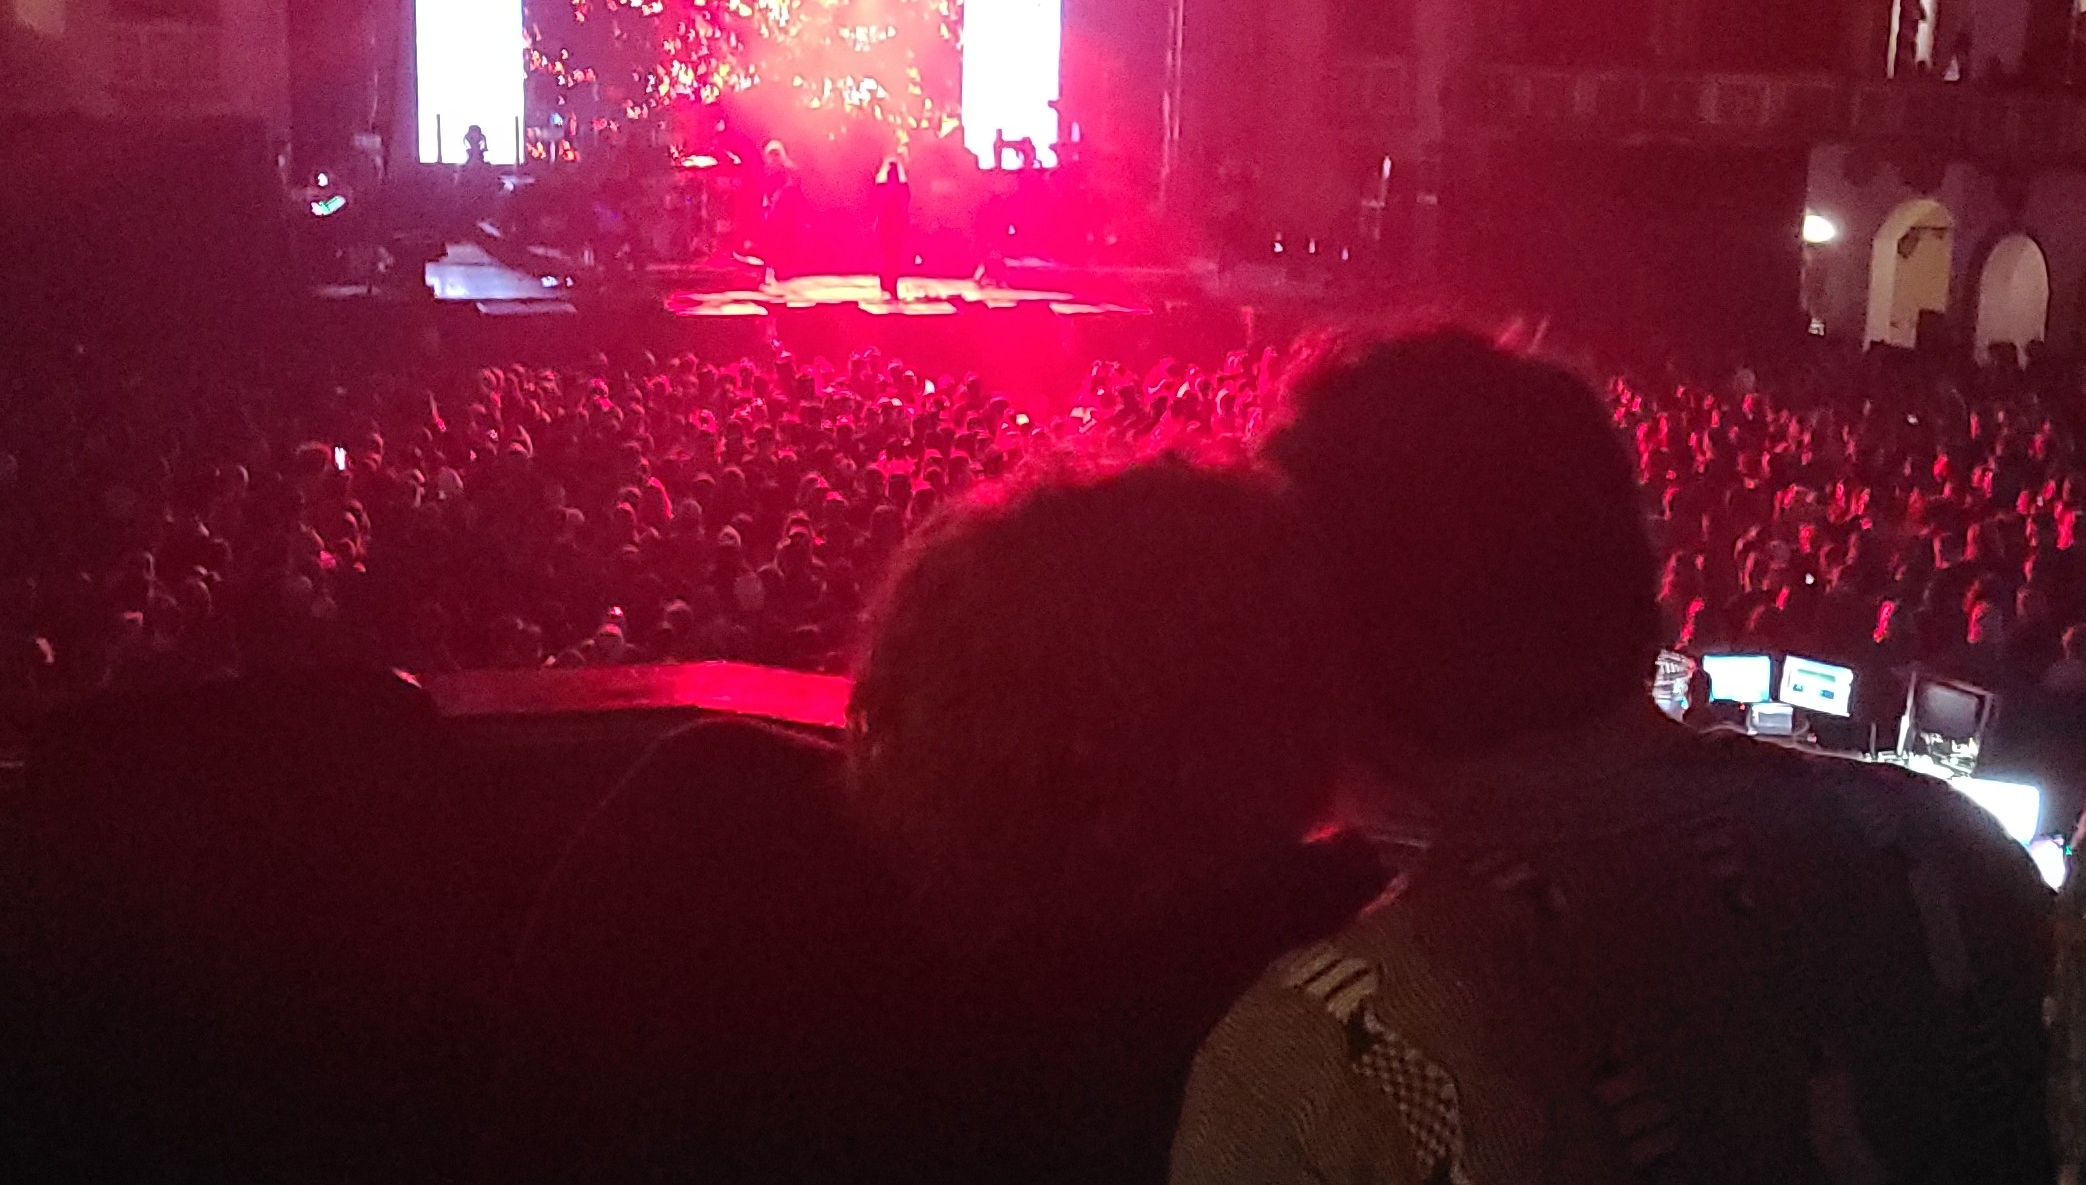 Something magical happened in the balcony during The Killers Tuesday night…